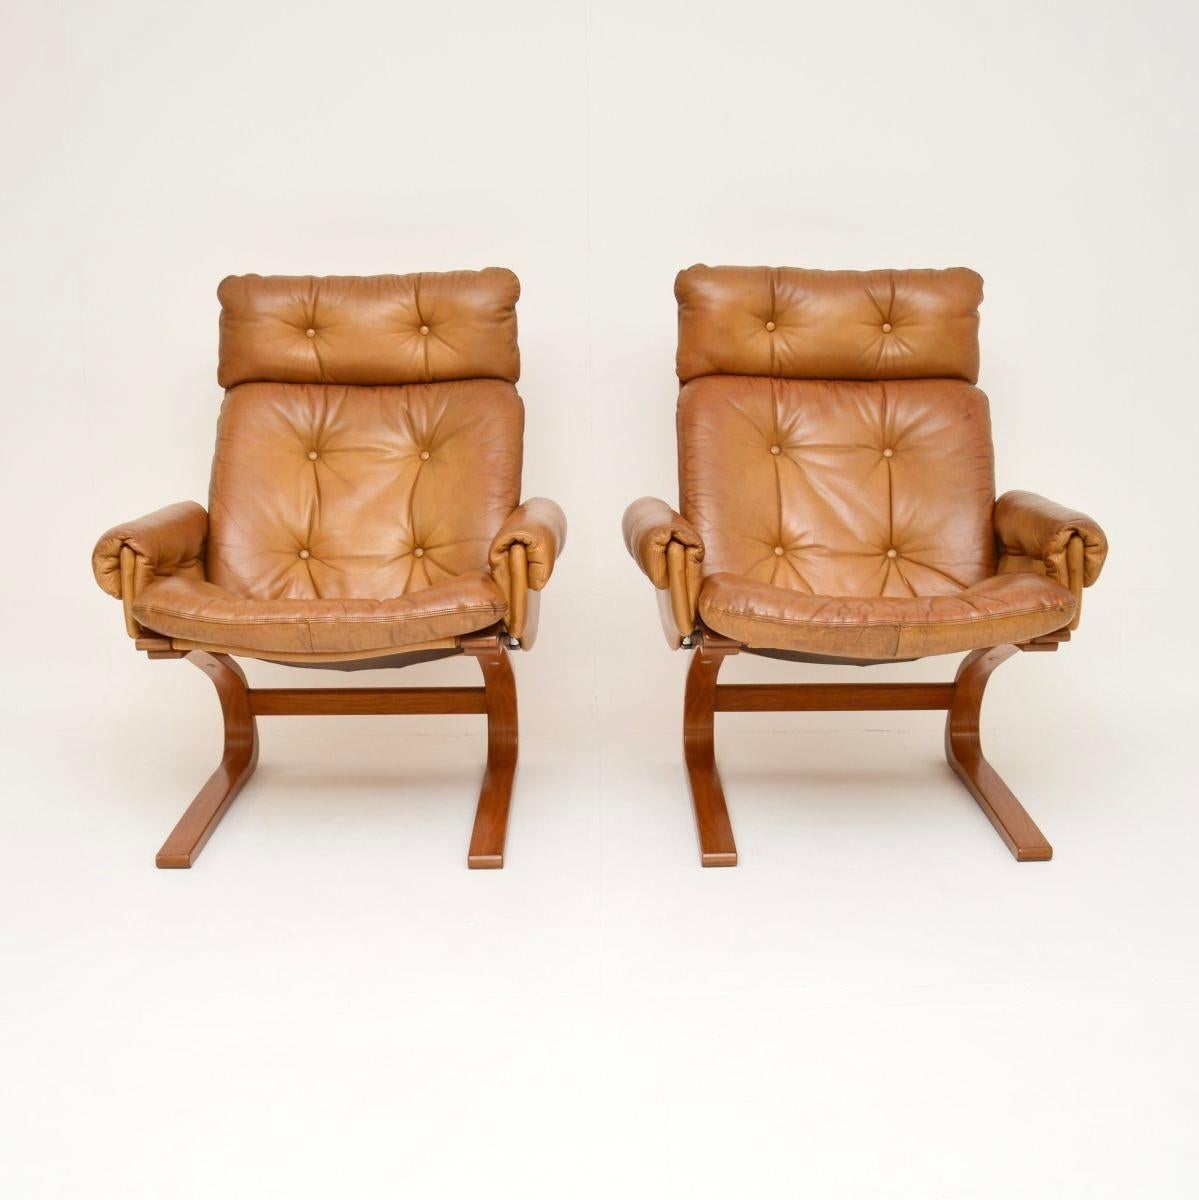 A stylish and extremely comfortable pair of vintage leather Kengu armchairs by Elsa and Nordahl Solheim for Rykken. They were made in Norway, they date from the 1970’s.

The quality is exceptional, they are beautifully designed and are really,